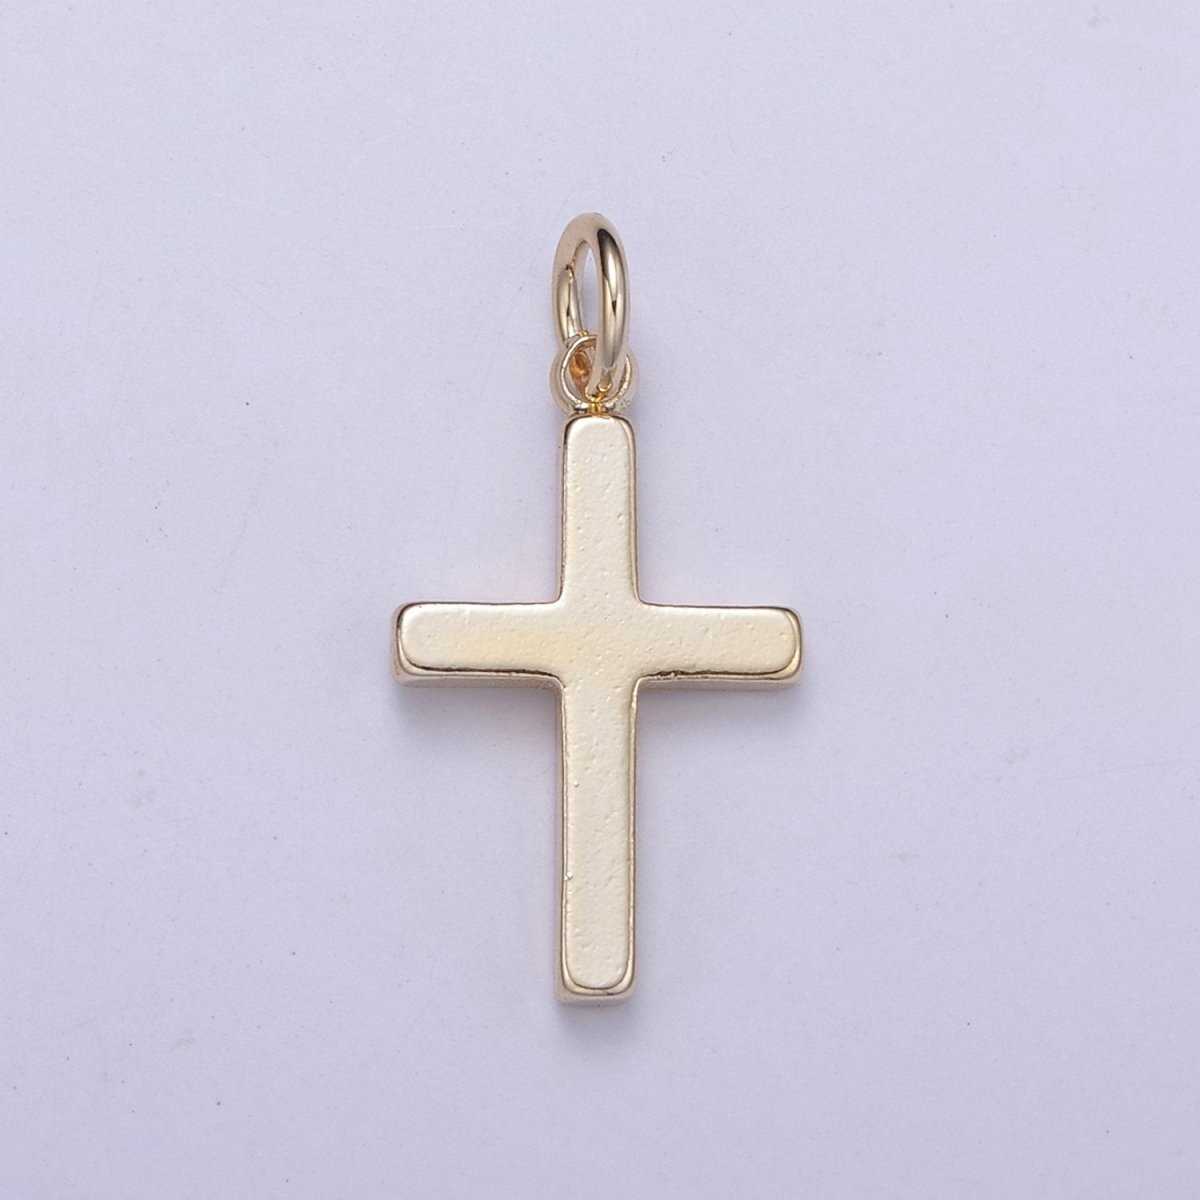 Gold Filled cross pendant, Simple Cross Charm, DIY Religion Jewelry Making Findings N-359 - DLUXCA